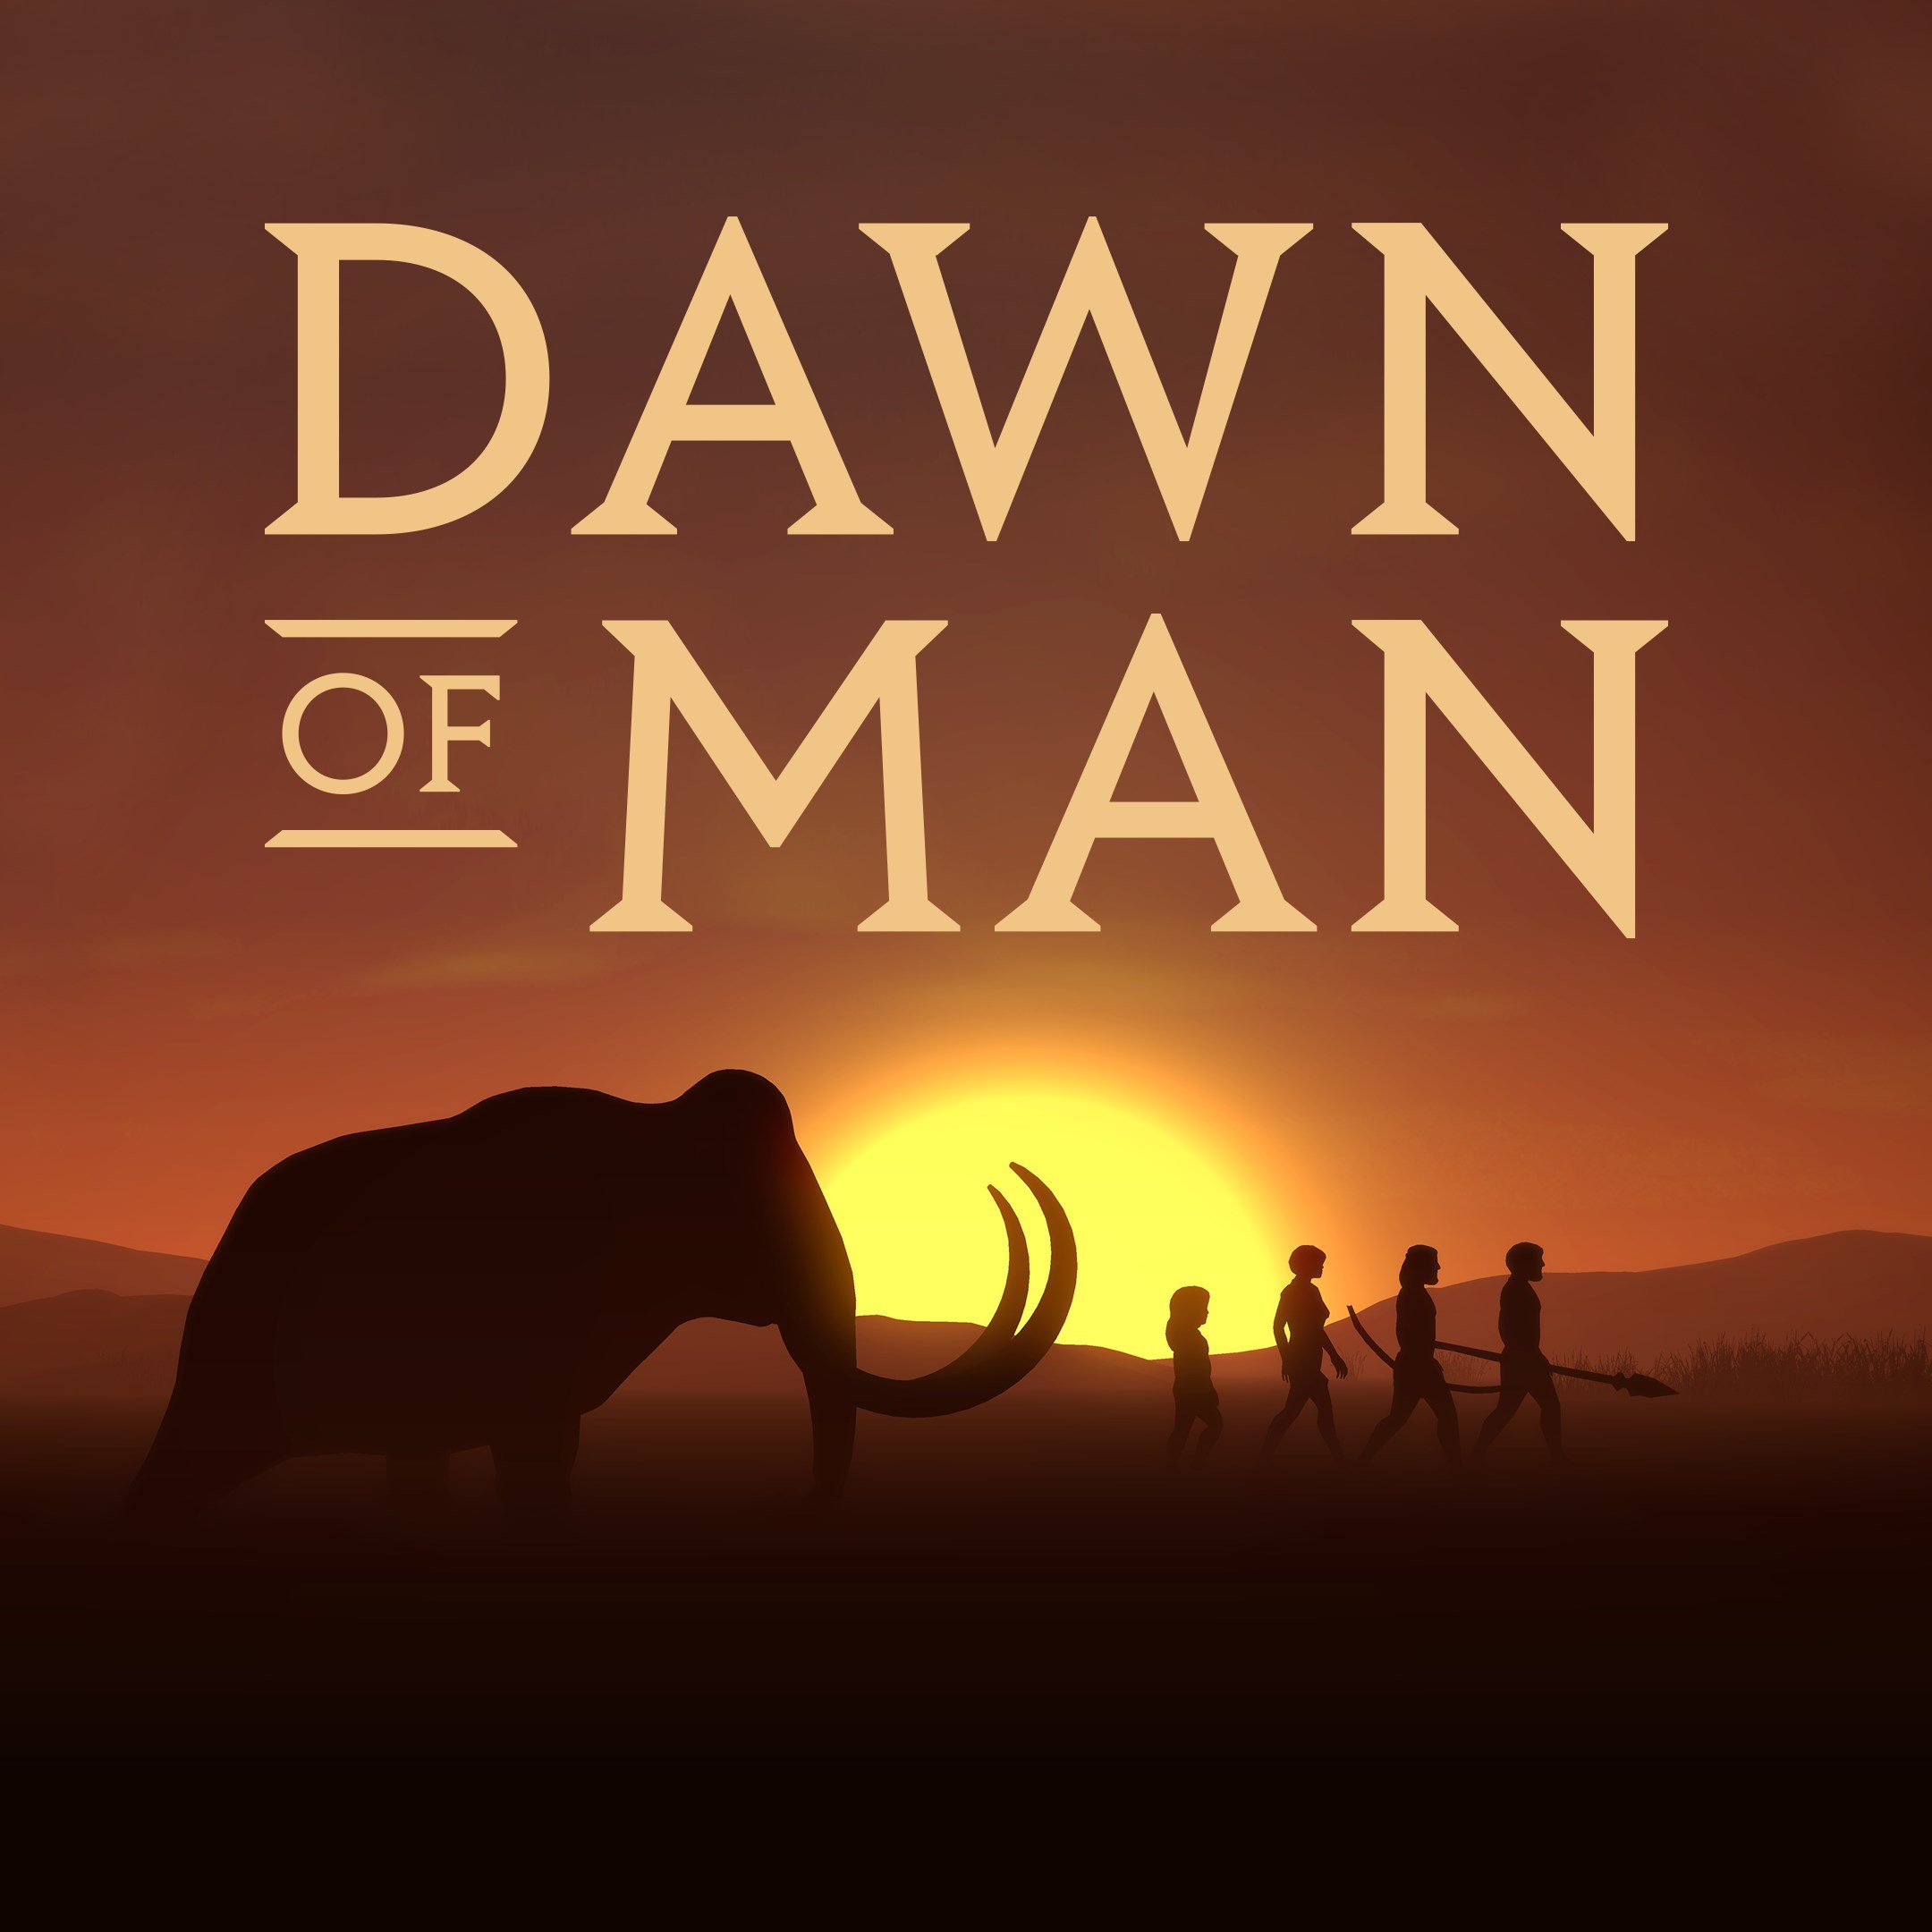 Boxart for Dawn of Man